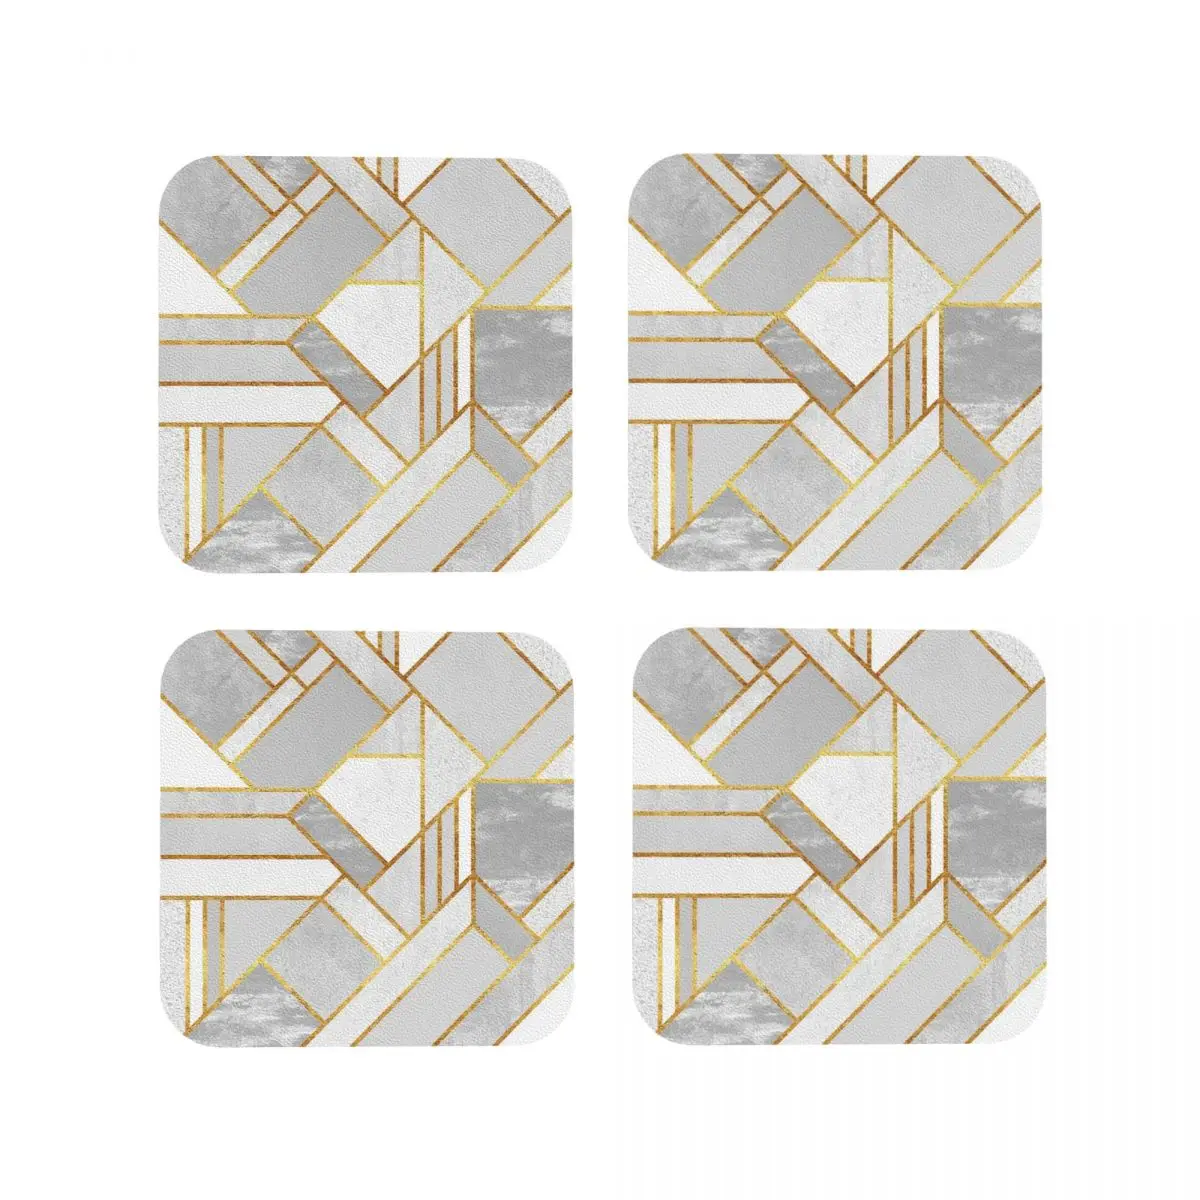 

Gold City Coasters Heat Resistant Mat Placemat Table kitchen Accessories Induction Mat Napkins Mat Coffee Mat Hot Pad